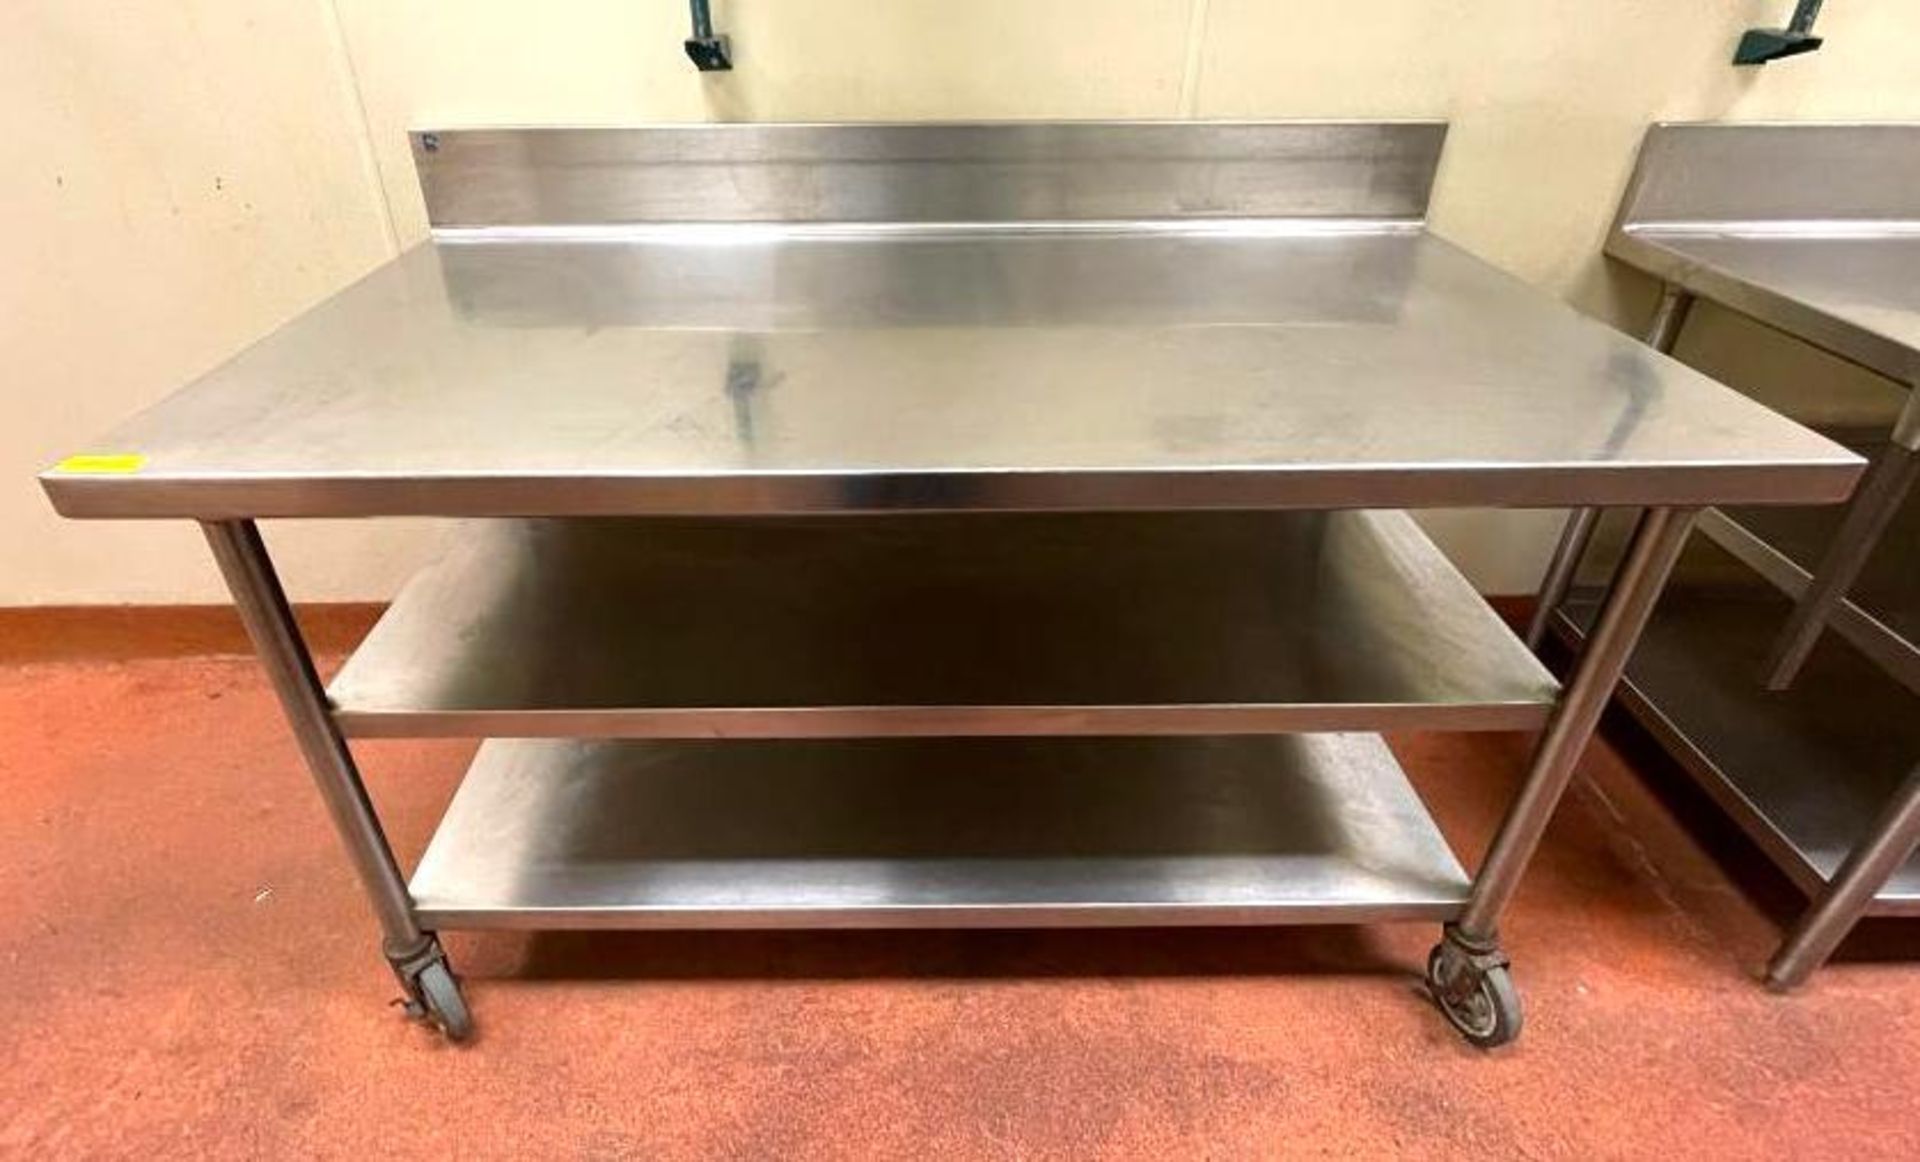 DESCRIPTION 5' STAINLESS TABLE WITH BACKSPLASH AND UNDERSTORAGE ON CASTERS SIZE 60"X30" QUANTITY: X